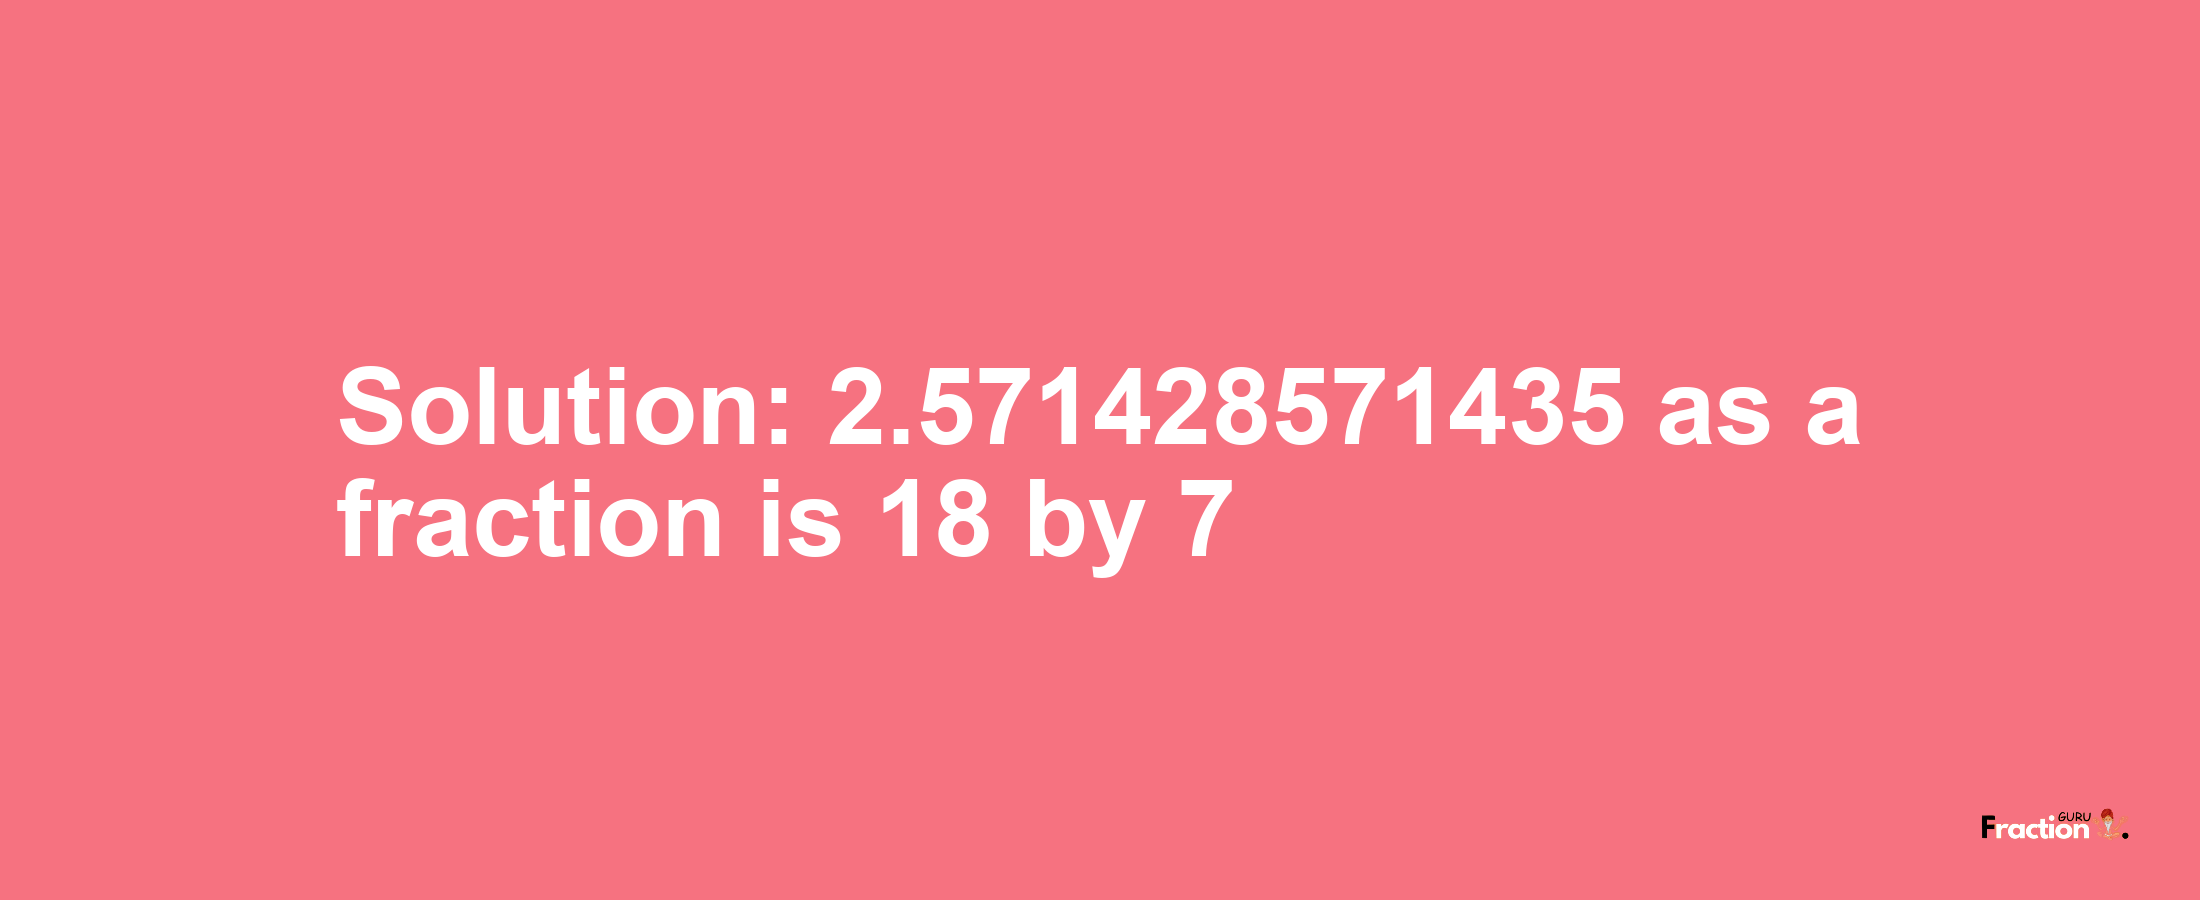 Solution:2.571428571435 as a fraction is 18/7